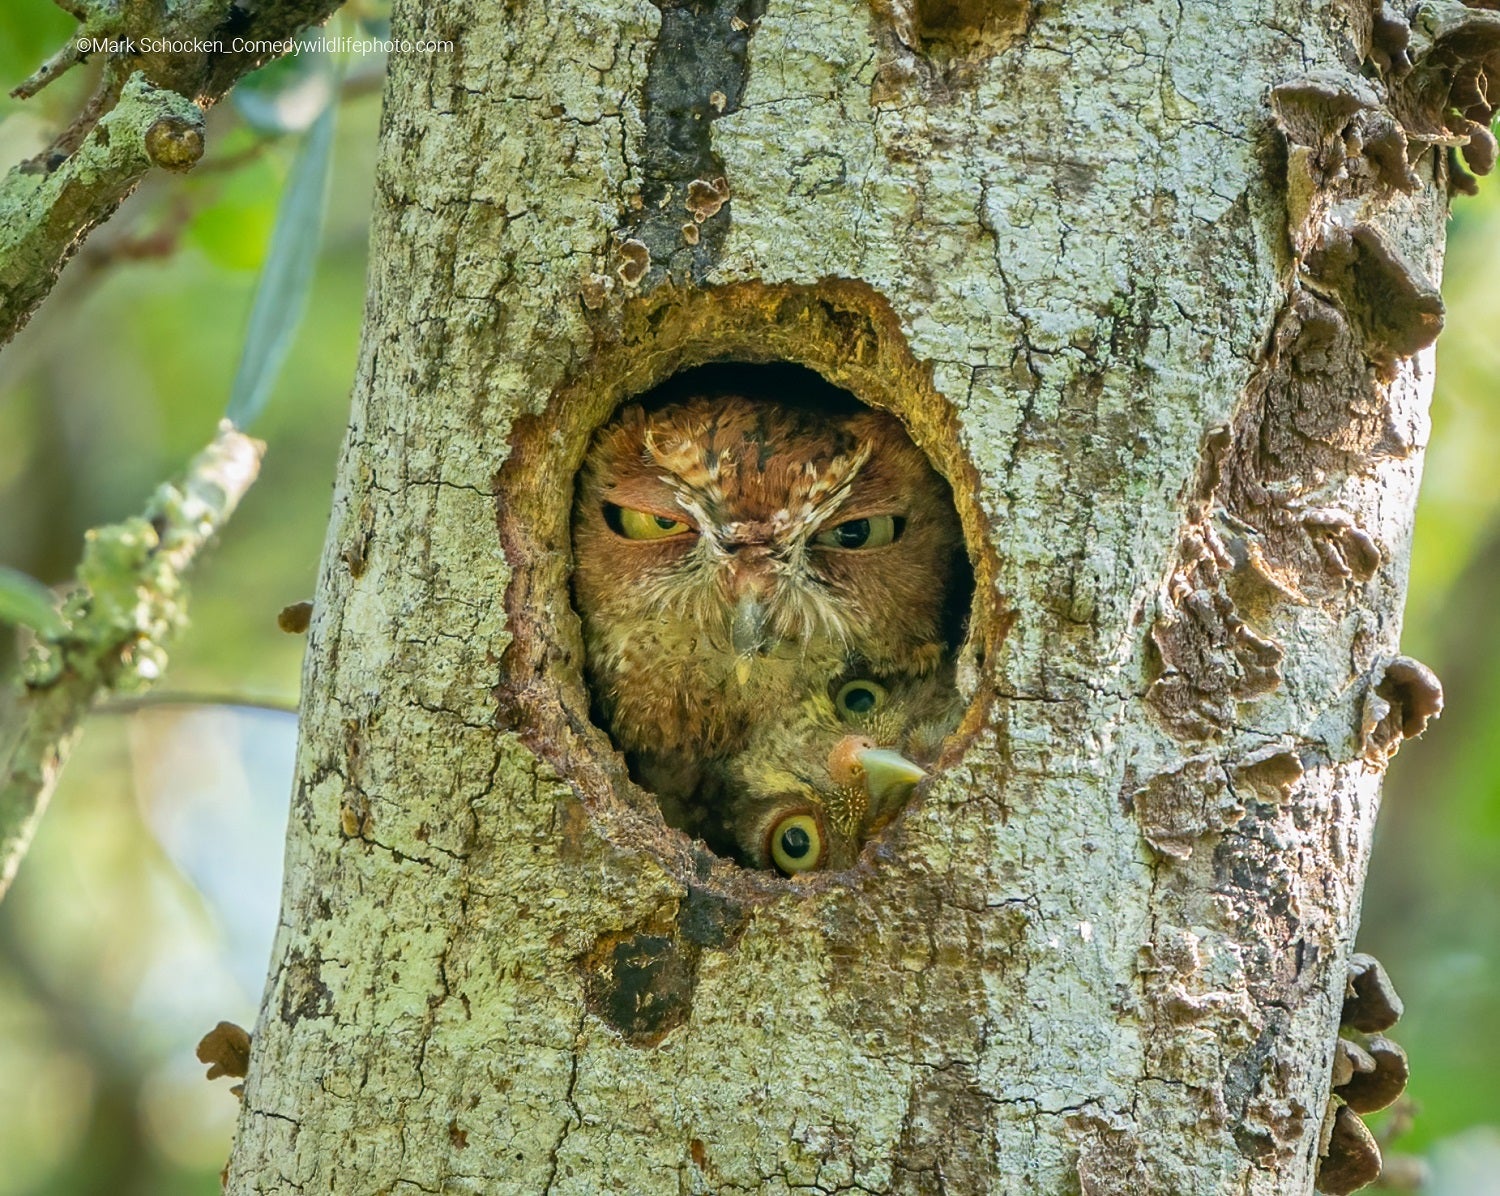 Eastern screech owl baby and mother squeezing their faces out of a nesting cavity